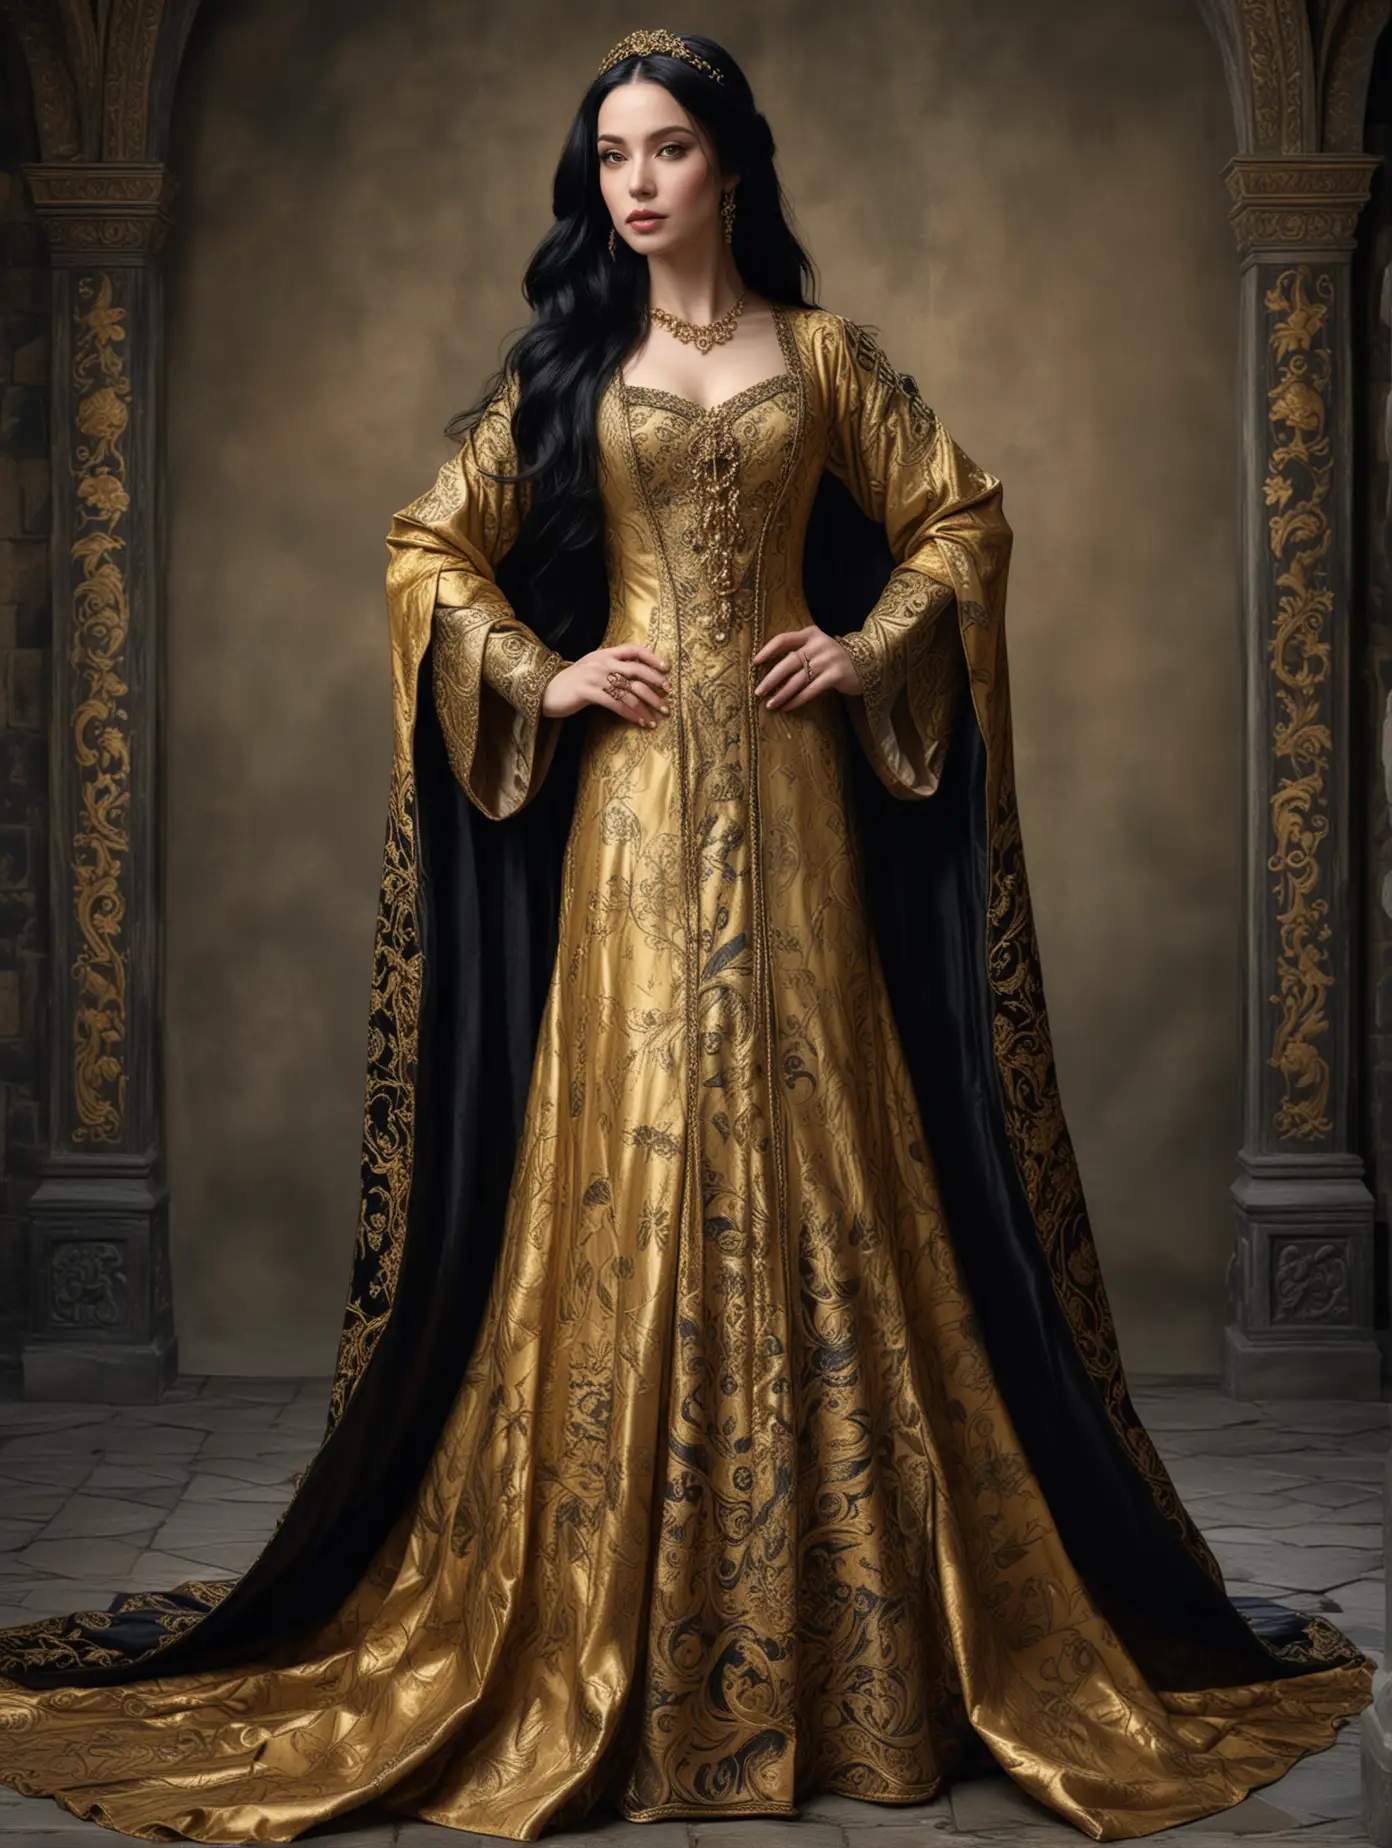 A full-length image depicts a extremely beautiful lady with waist-length long, black hair, in a gold extravagant medieval robe.